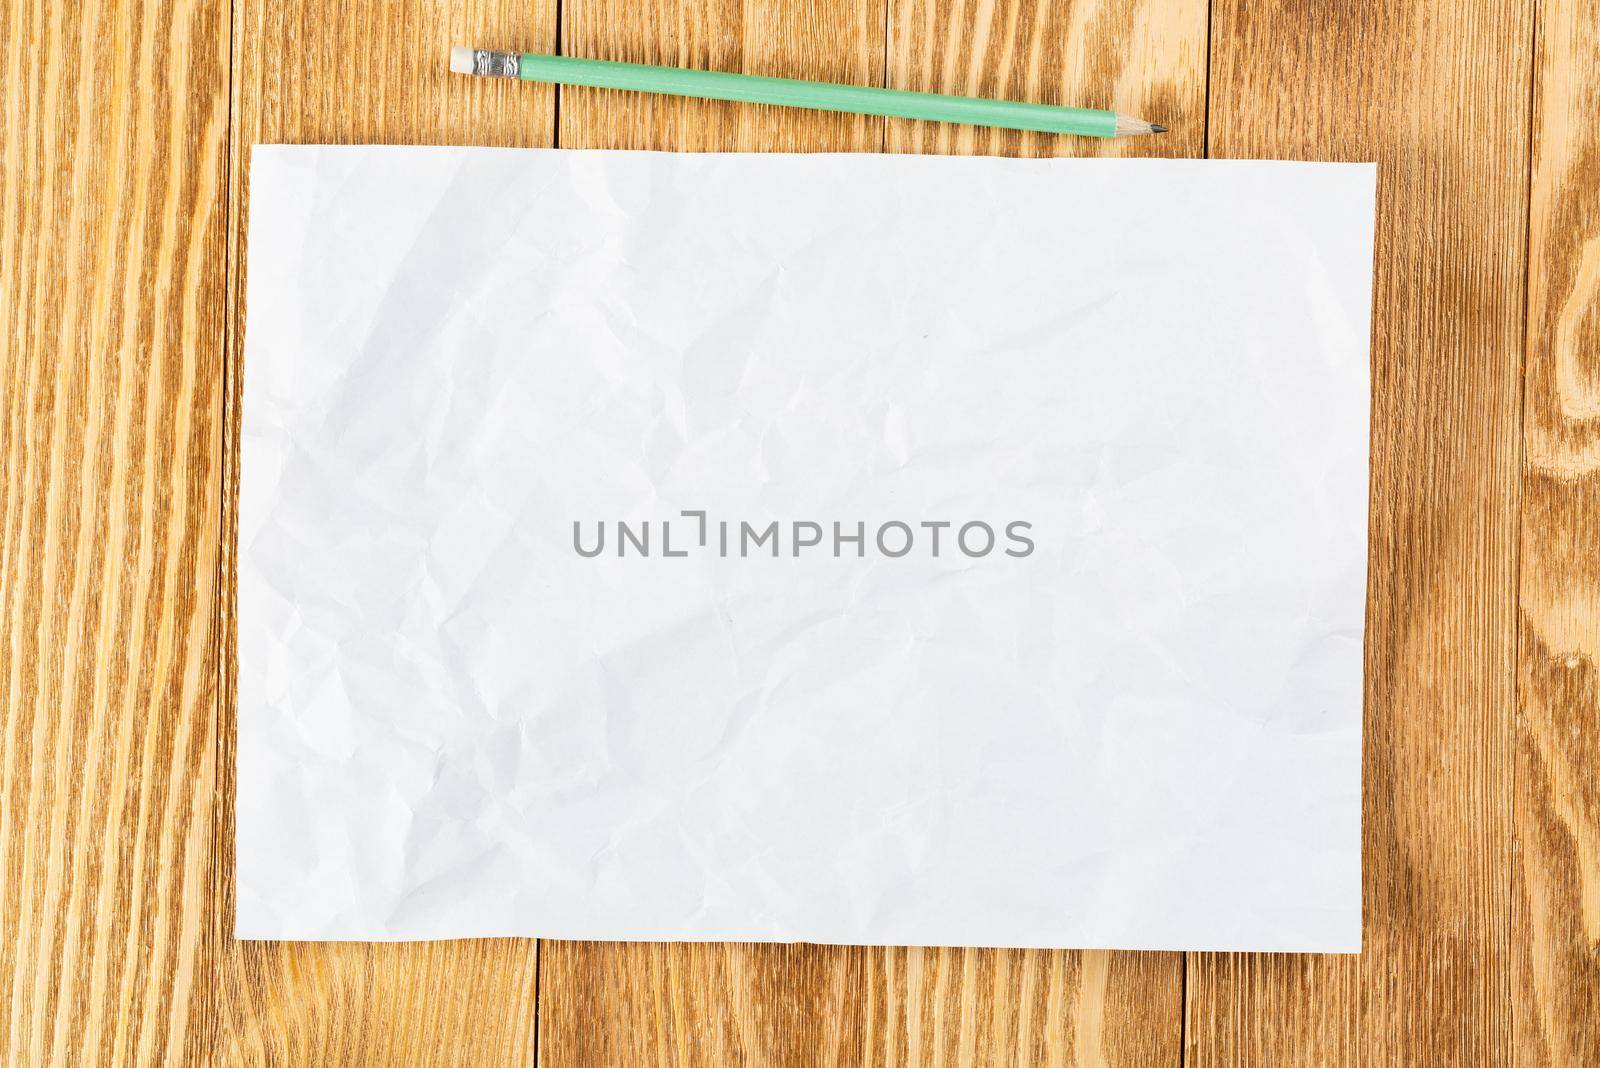 Sheet of paper lying on wooden table. Blank white a4 format paper with pencil. Textured natural wooden background. Vintage copy space for design. Business planning and idea generation.